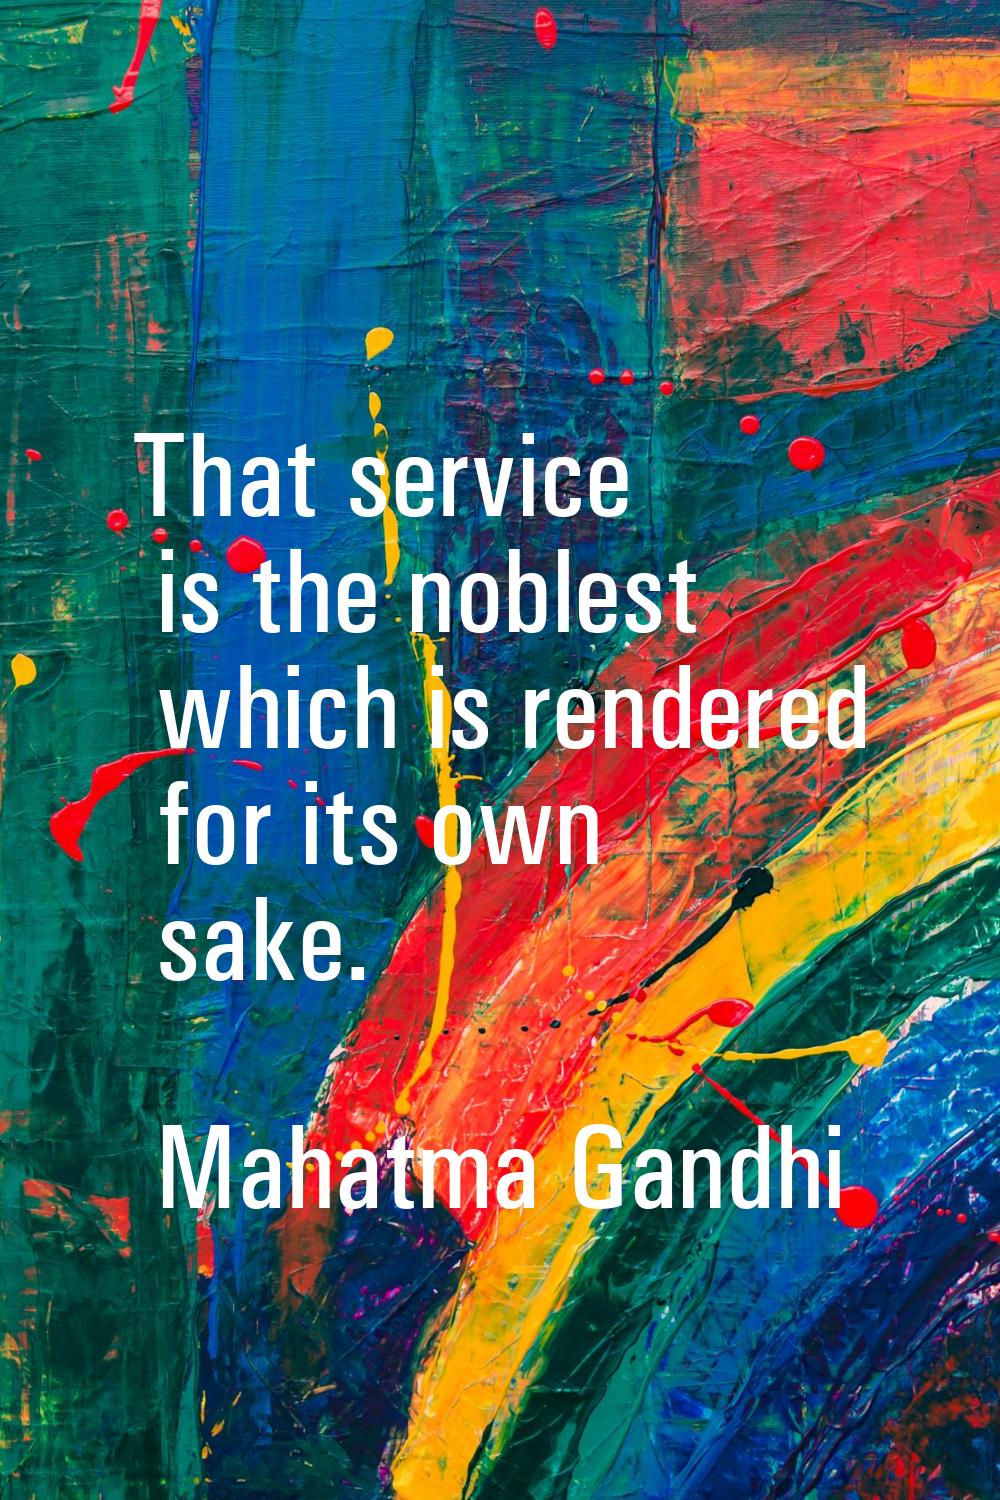 That service is the noblest which is rendered for its own sake.